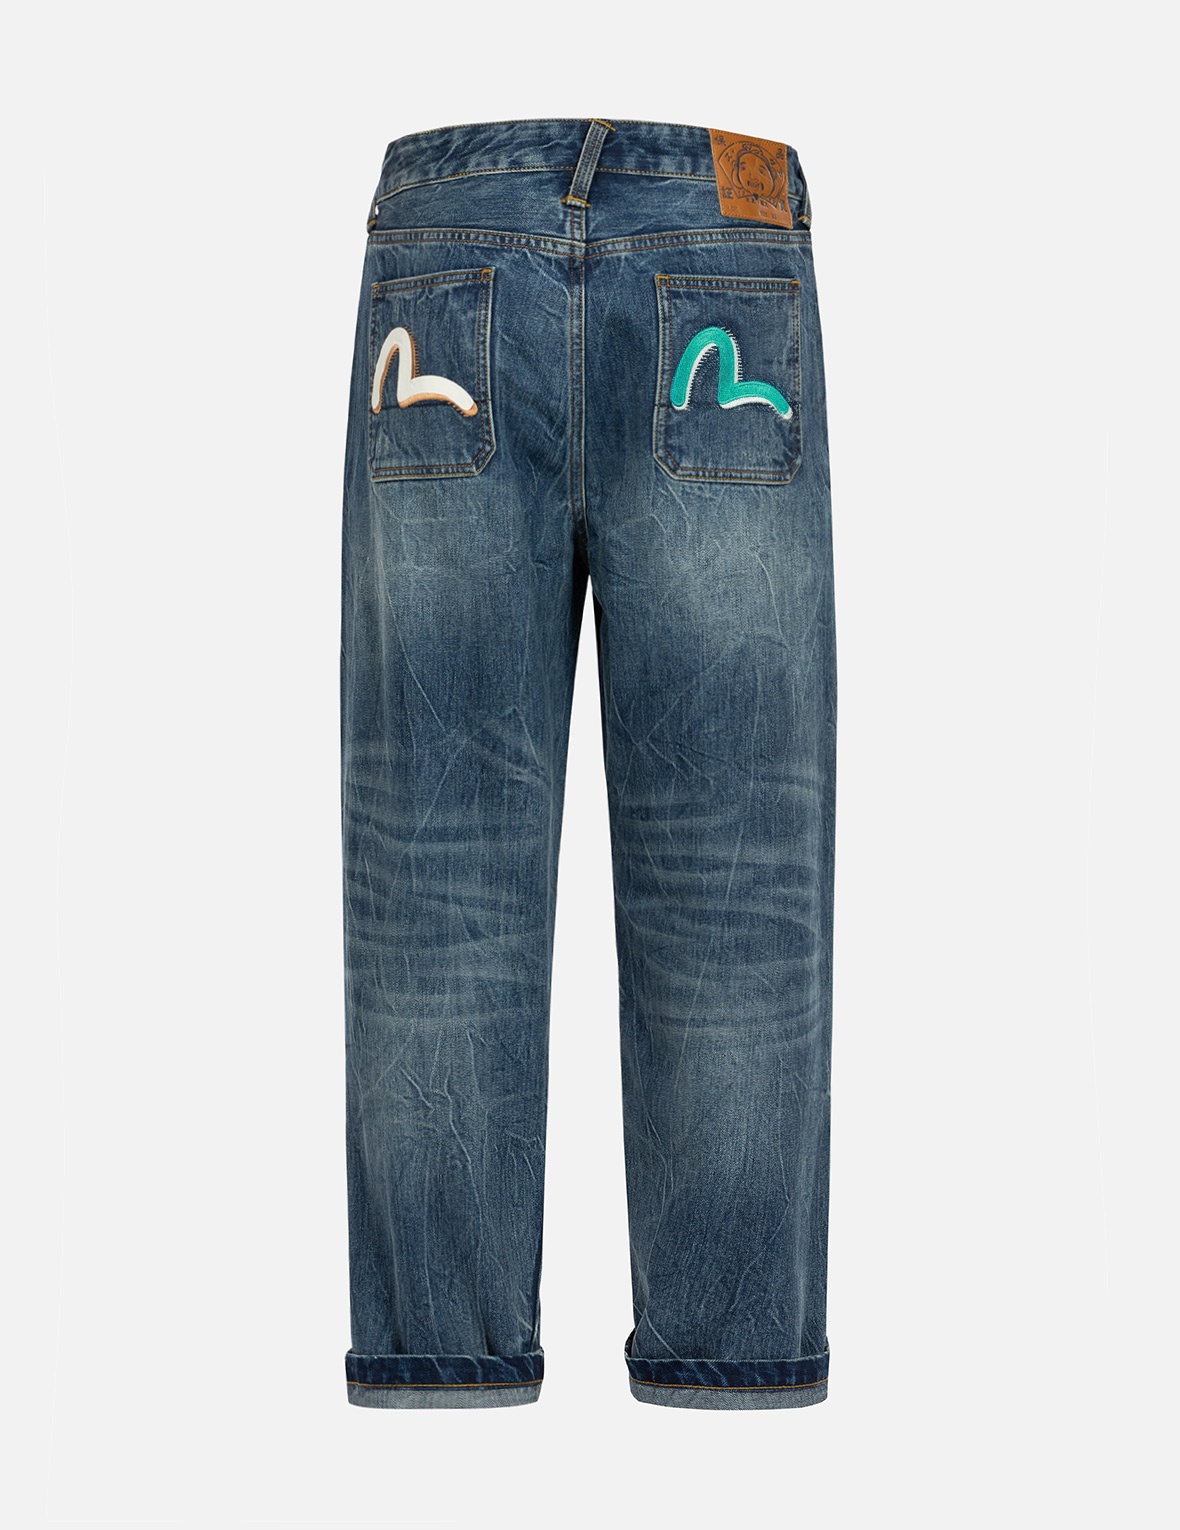 SEAGULL PRINT AND EMBROIDERY RELAX FIT JEANS - 1